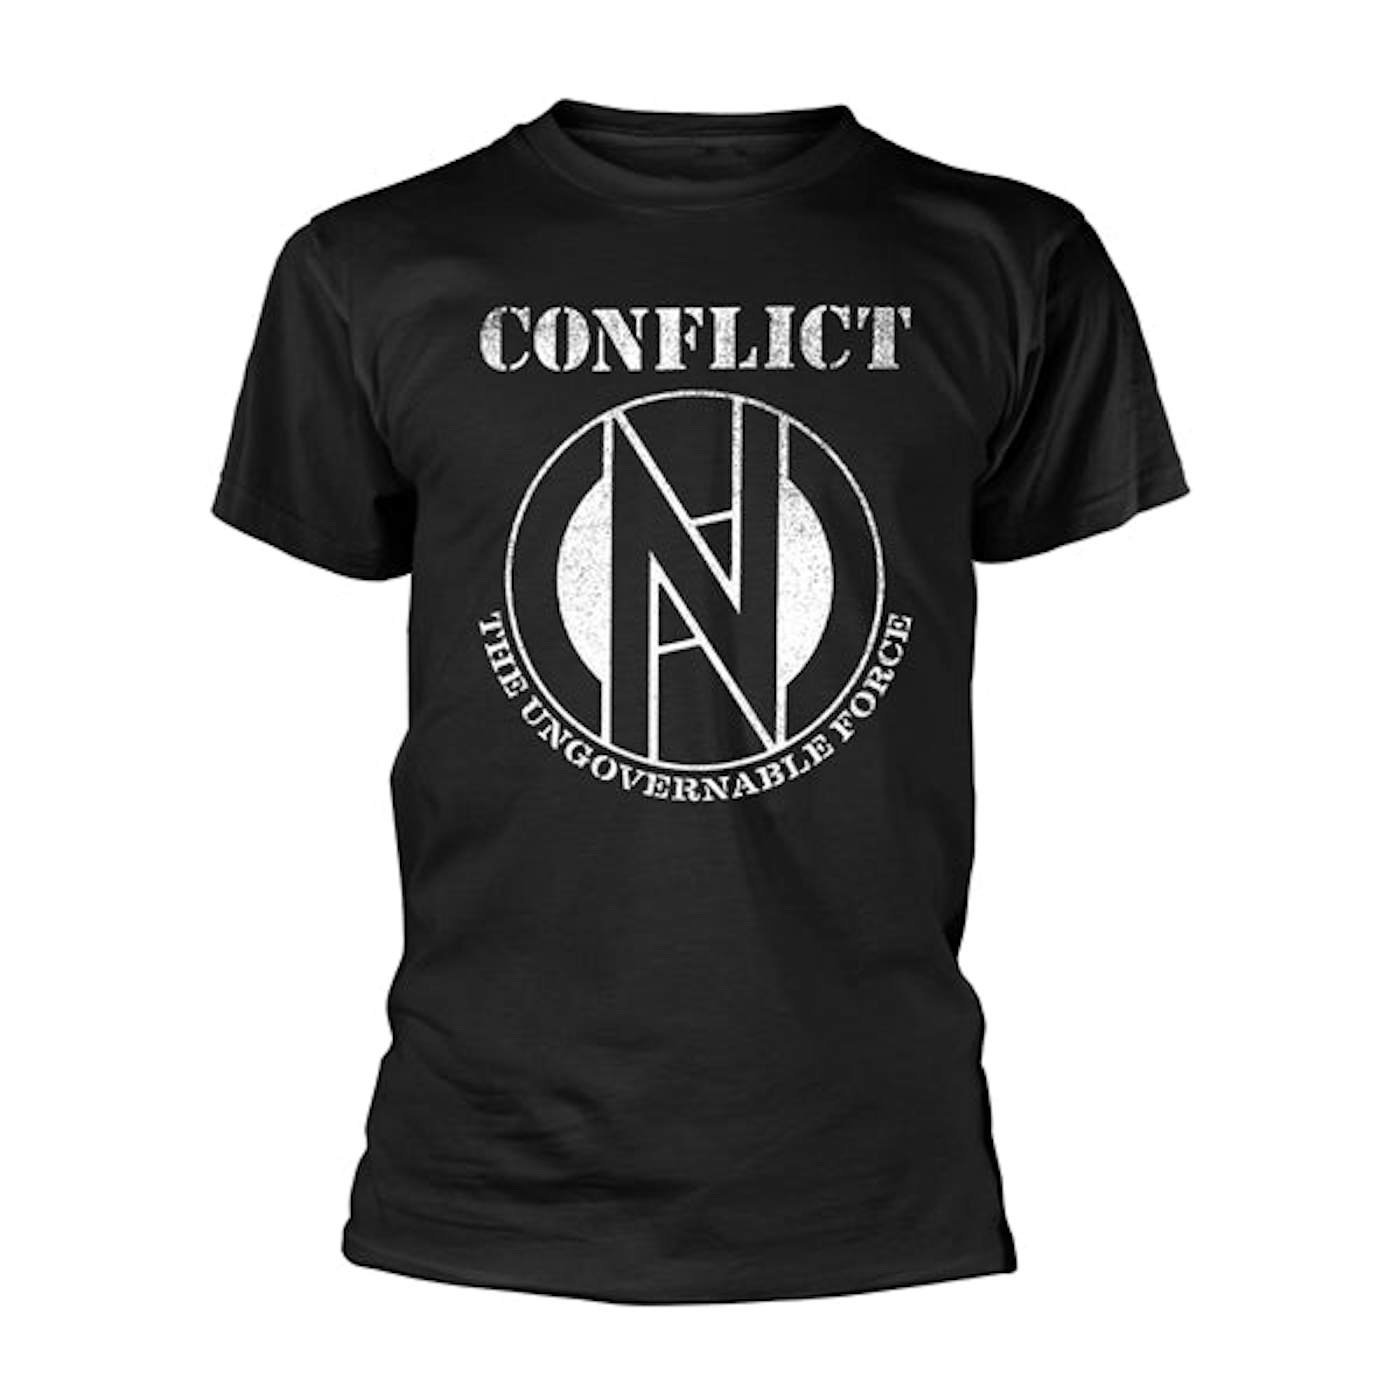 Conflict T Shirt - Standard Issue (Black)